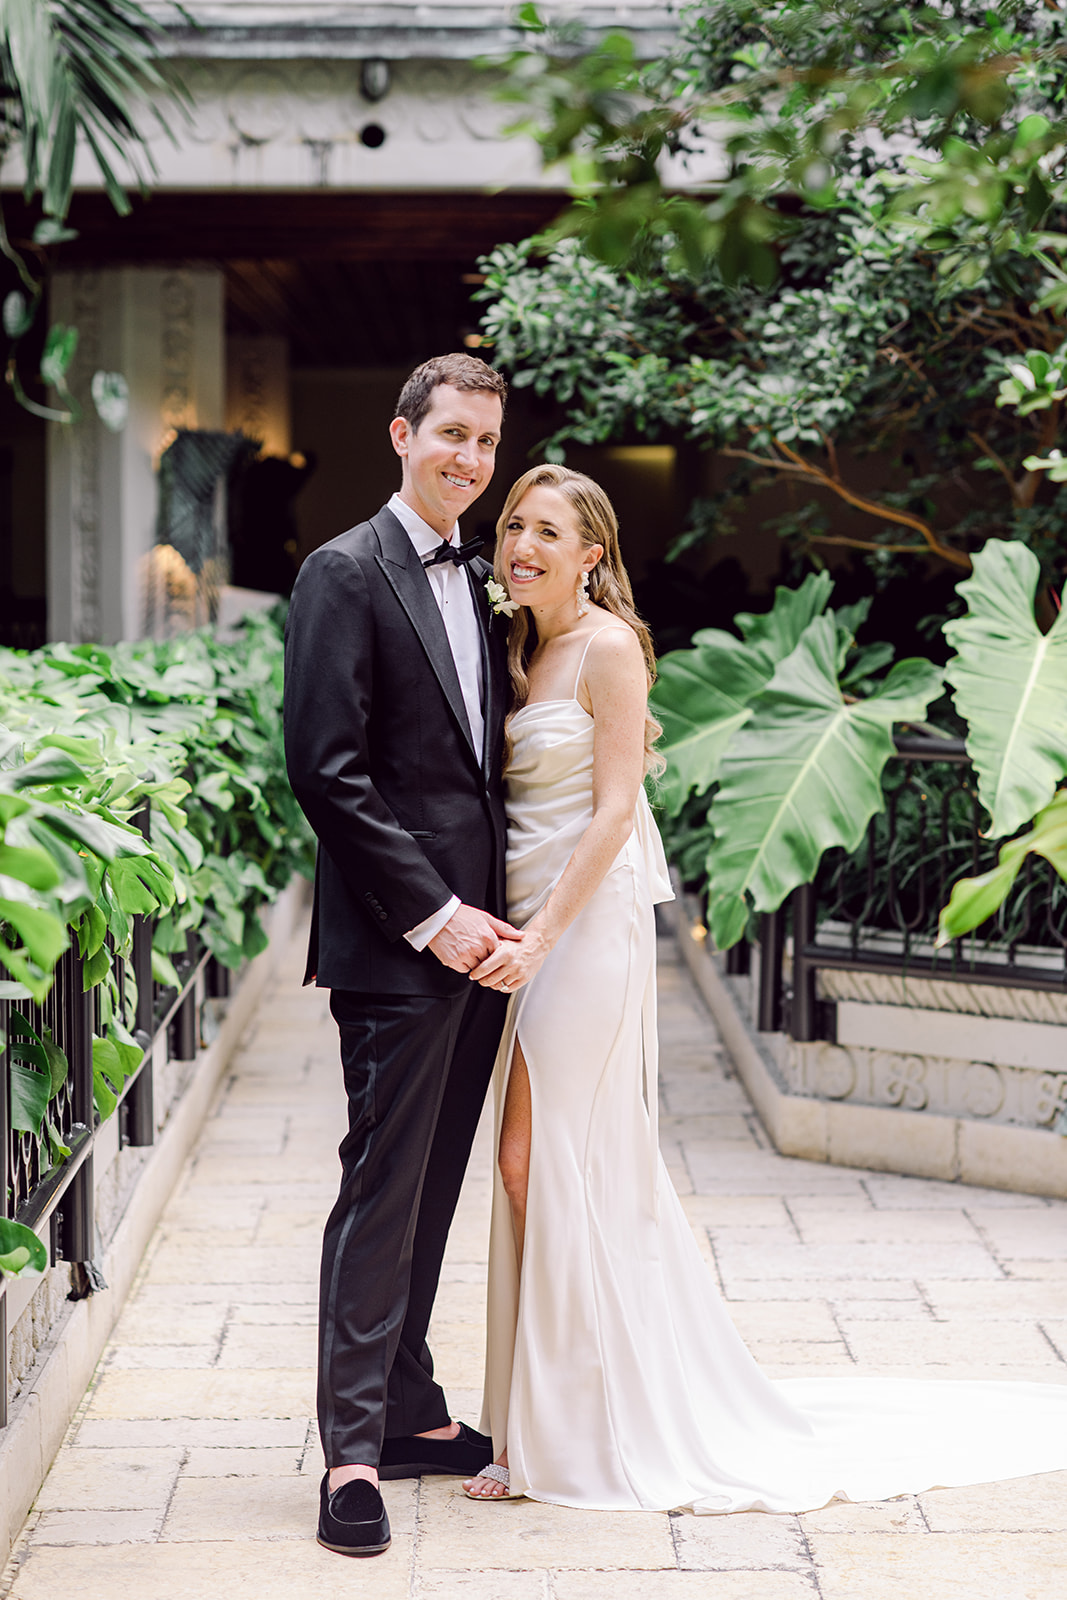 Bride & groom portrait after first look at Mayfair House Hotel & Garden in Miami on wedding day.